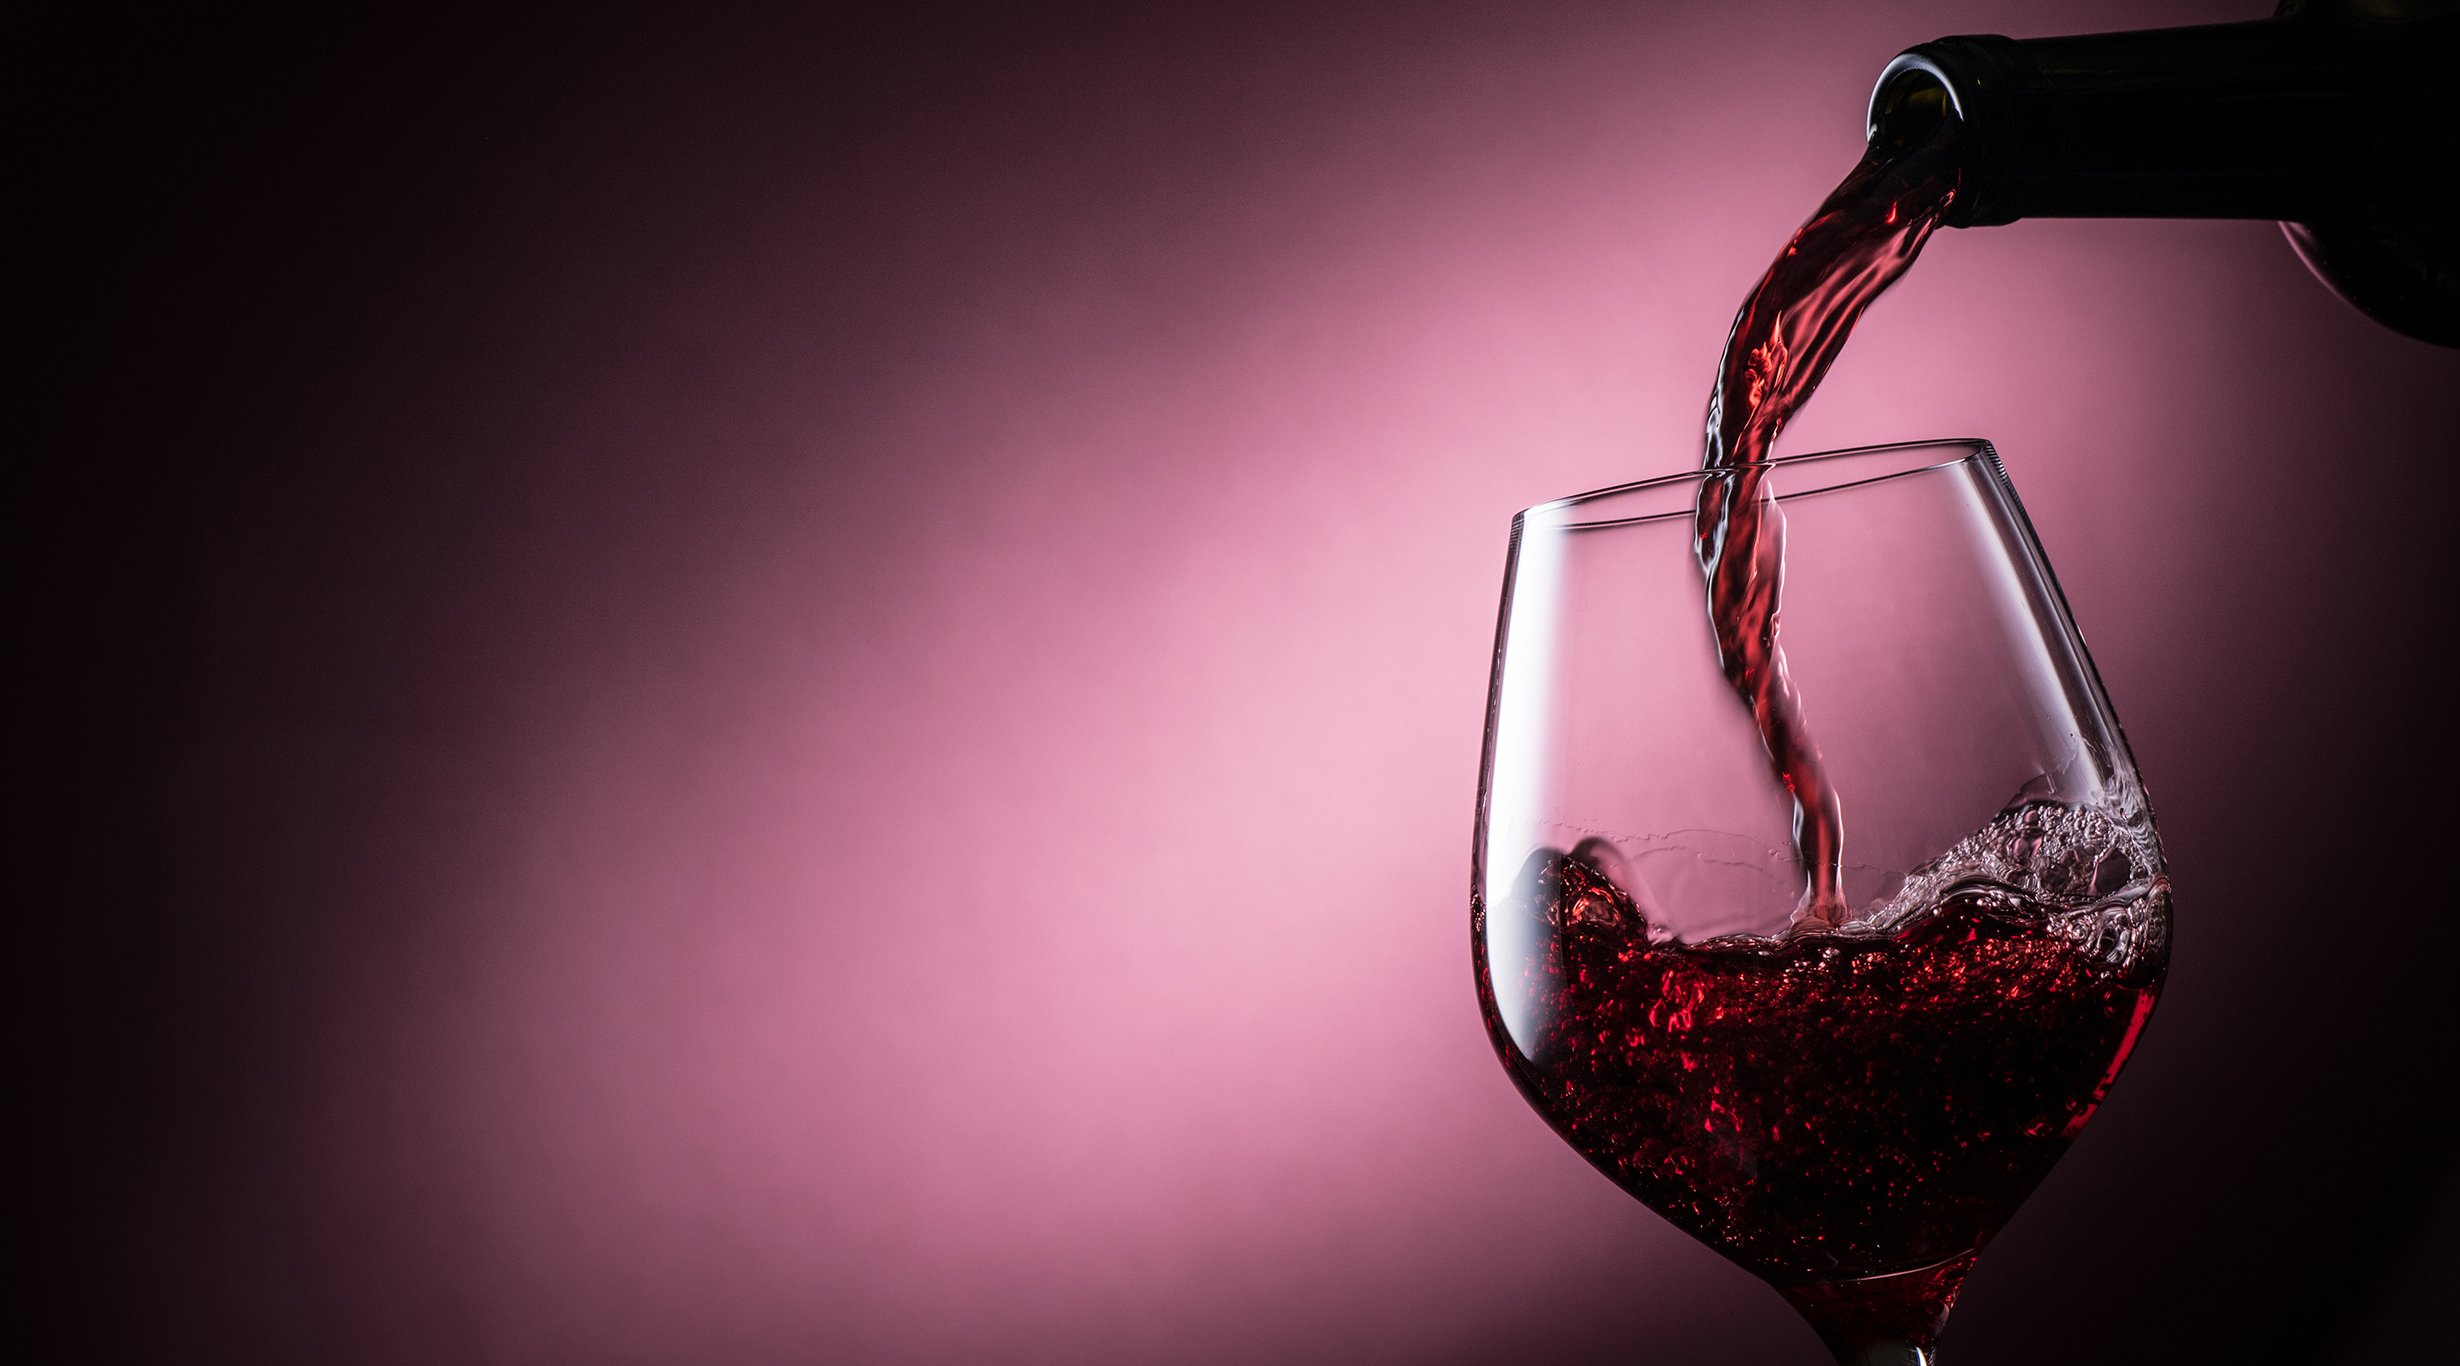 50 Fun Facts About Wine